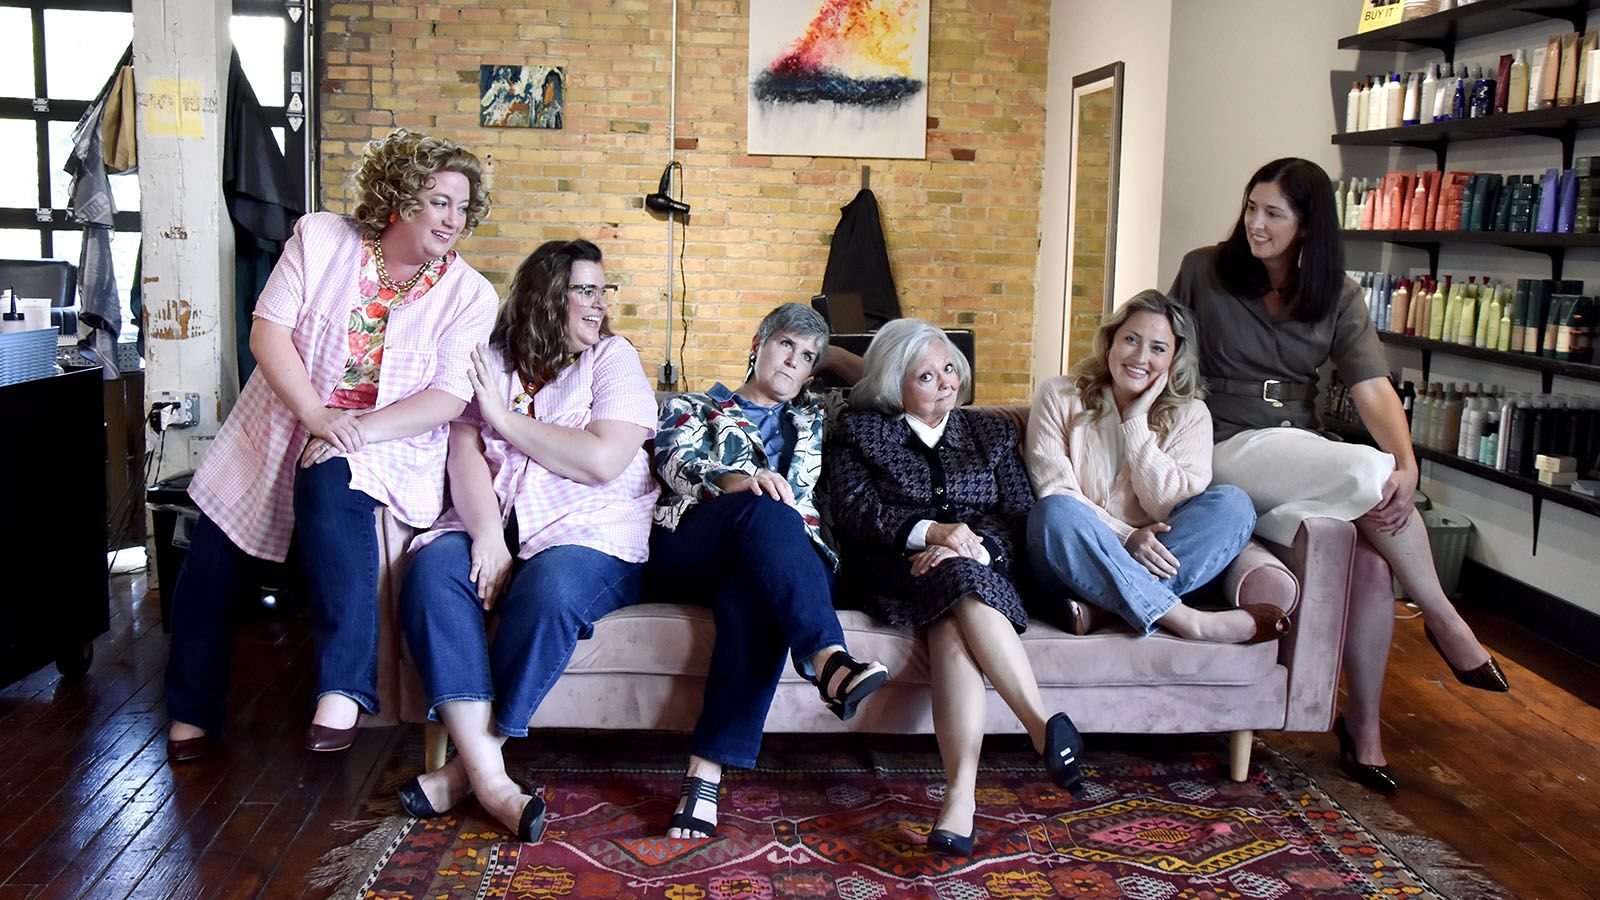 The Fort Wayne Civic Theatre's production of Steel Magnolias begins Sept. 9.